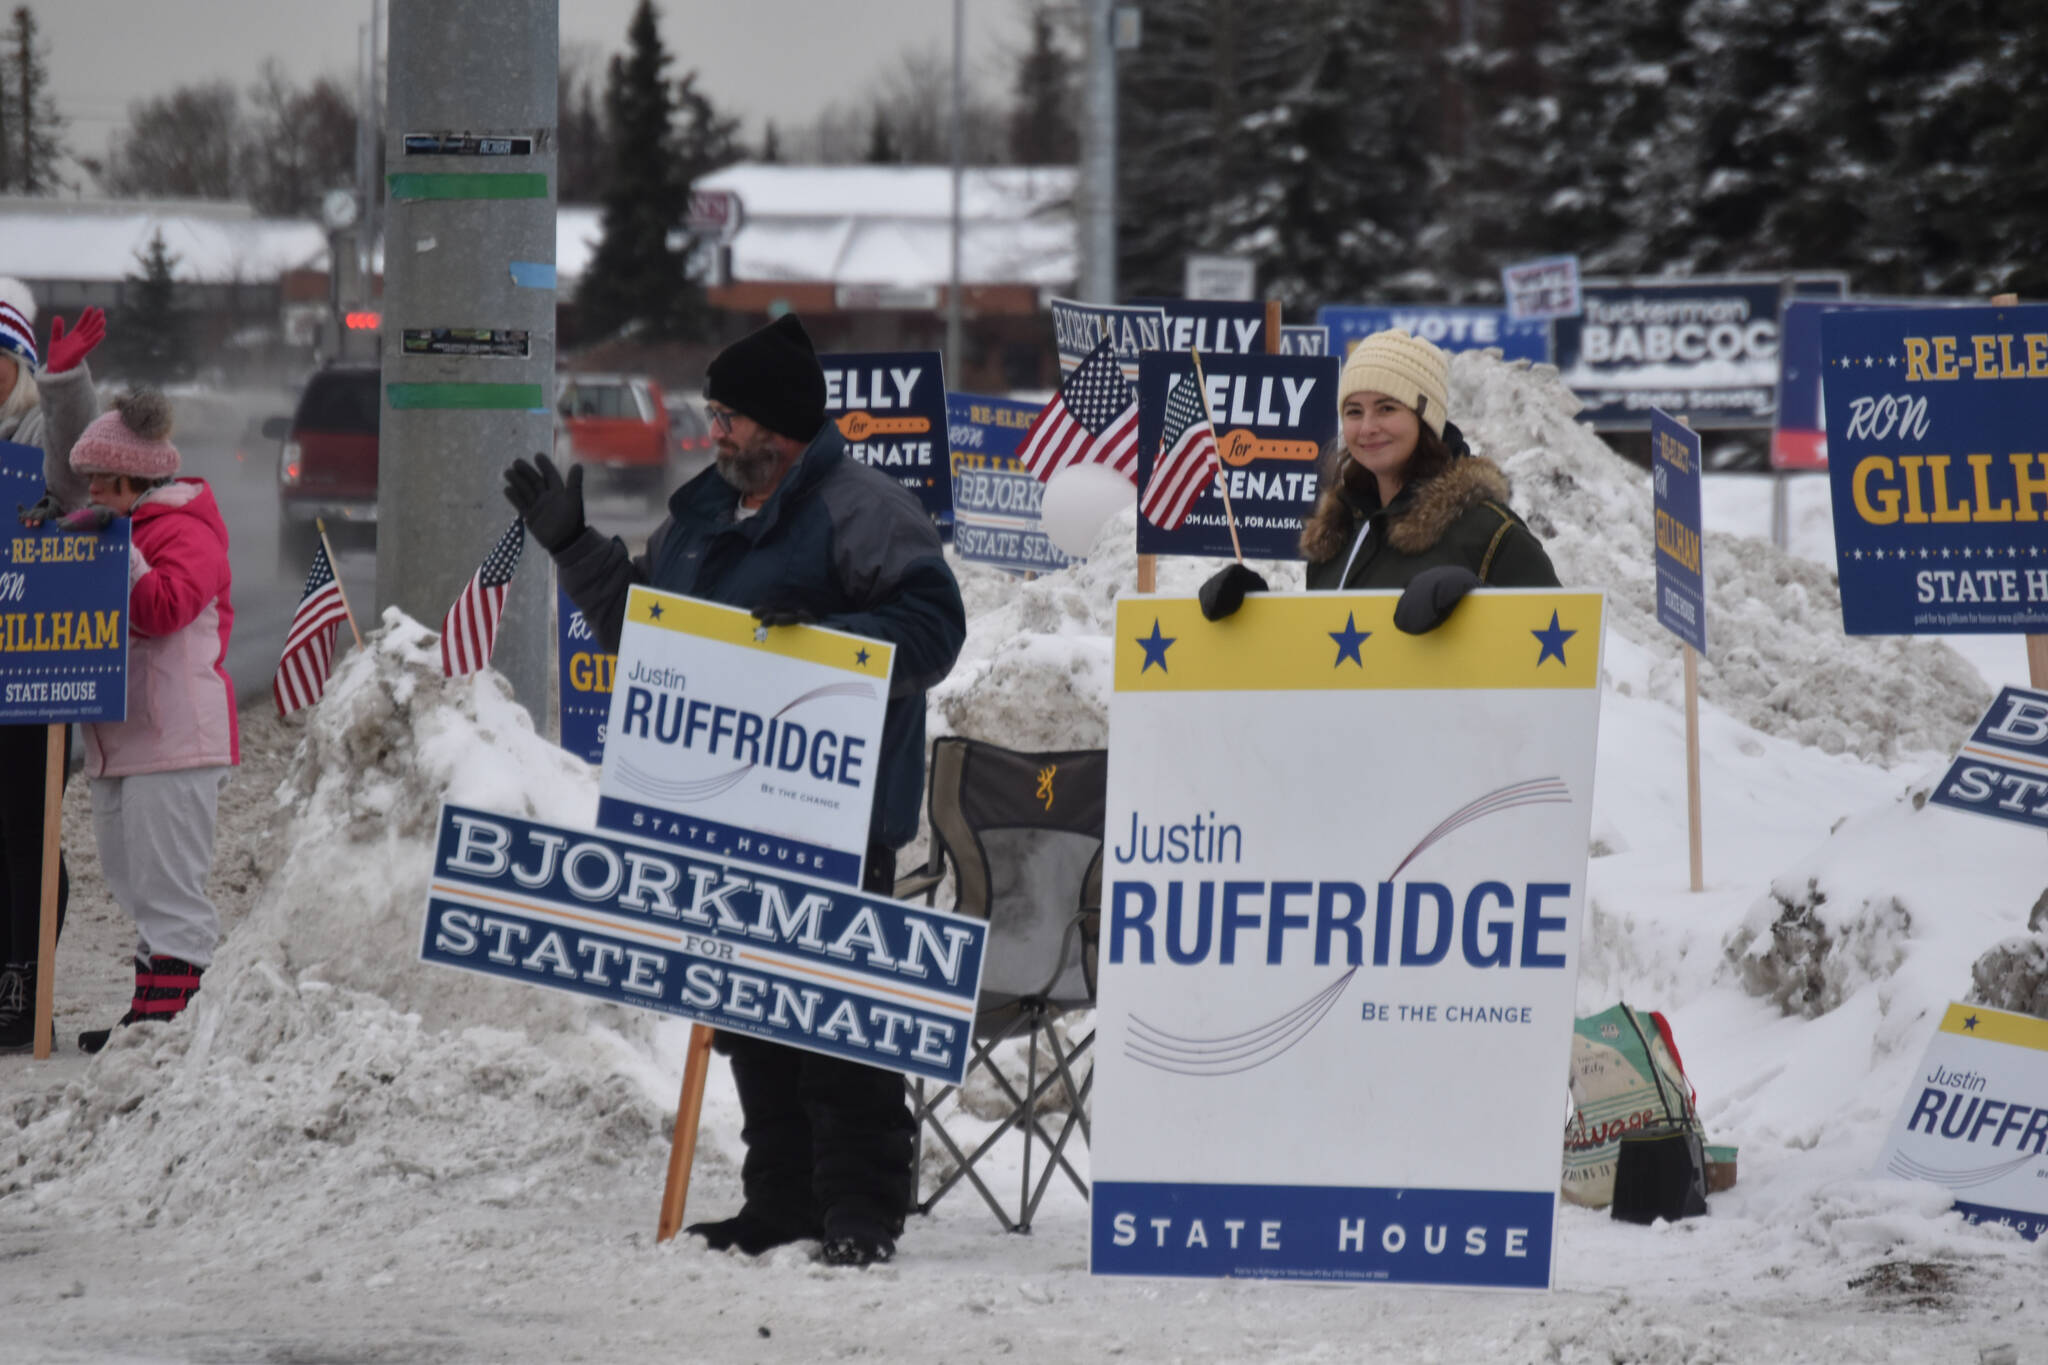 Michael O'Rourke and another supporter wave signs for Justin Ruffridge on Election Day, Nov. 8, 2022 in Kenai, Alaska. (Jake Dye/Peninsula Clarion)